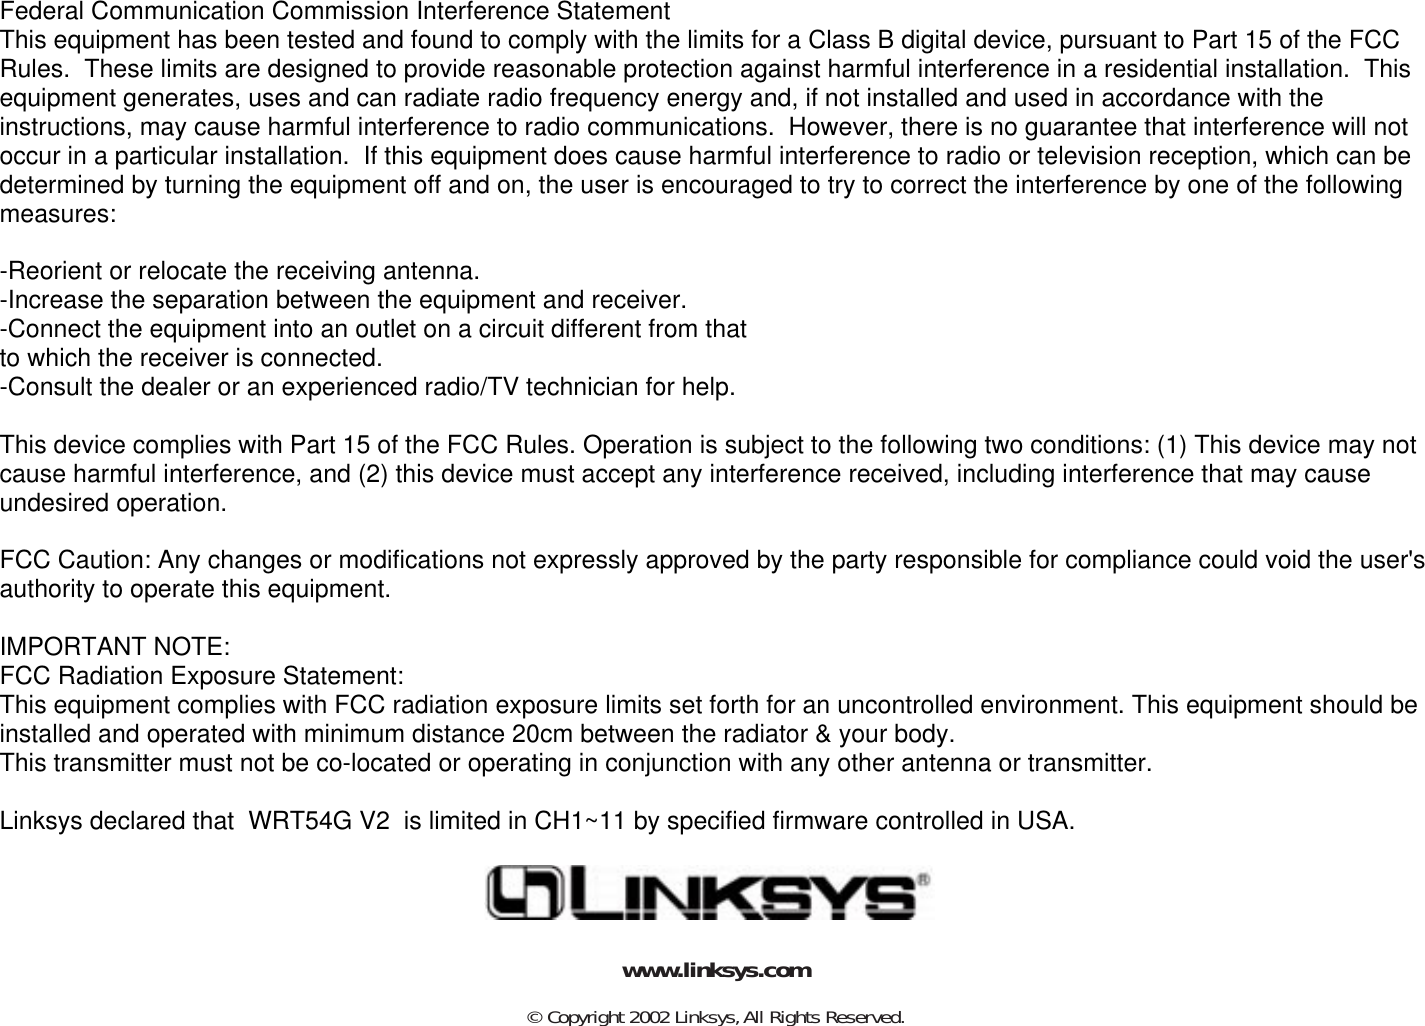 © Copyright 2002 Linksys,All Rights Reserved.www.linksys.comFederal Communication Commission Interference StatementThis equipment has been tested and found to comply with the limits for a Class B digital device, pursuant to Part 15 of the FCC Rules.  These limits are designed to provide reasonable protection against harmful interference in a residential installation.  This equipment generates, uses and can radiate radio frequency energy and, if not installed and used in accordance with the instructions, may cause harmful interference to radio communications.  However, there is no guarantee that interference will not occur in a particular installation.  If this equipment does cause harmful interference to radio or television reception, which can be determined by turning the equipment off and on, the user is encouraged to try to correct the interference by one of the following measures:-Reorient or relocate the receiving antenna.-Increase the separation between the equipment and receiver.-Connect the equipment into an outlet on a circuit different from thatto which the receiver is connected.-Consult the dealer or an experienced radio/TV technician for help.This device complies with Part 15 of the FCC Rules. Operation is subject to the following two conditions: (1) This device may not cause harmful interference, and (2) this device must accept any interference received, including interference that may cause undesired operation.FCC Caution: Any changes or modifications not expressly approved by the party responsible for compliance could void the user&apos;s authority to operate this equipment.IMPORTANT NOTE:FCC Radiation Exposure Statement:This equipment complies with FCC radiation exposure limits set forth for an uncontrolled environment. This equipment should be installed and operated with minimum distance 20cm between the radiator &amp; your body.This transmitter must not be co-located or operating in conjunction with any other antenna or transmitter.Linksys declared that  WRT54G V2  is limited in CH1~11 by specified firmware controlled in USA.